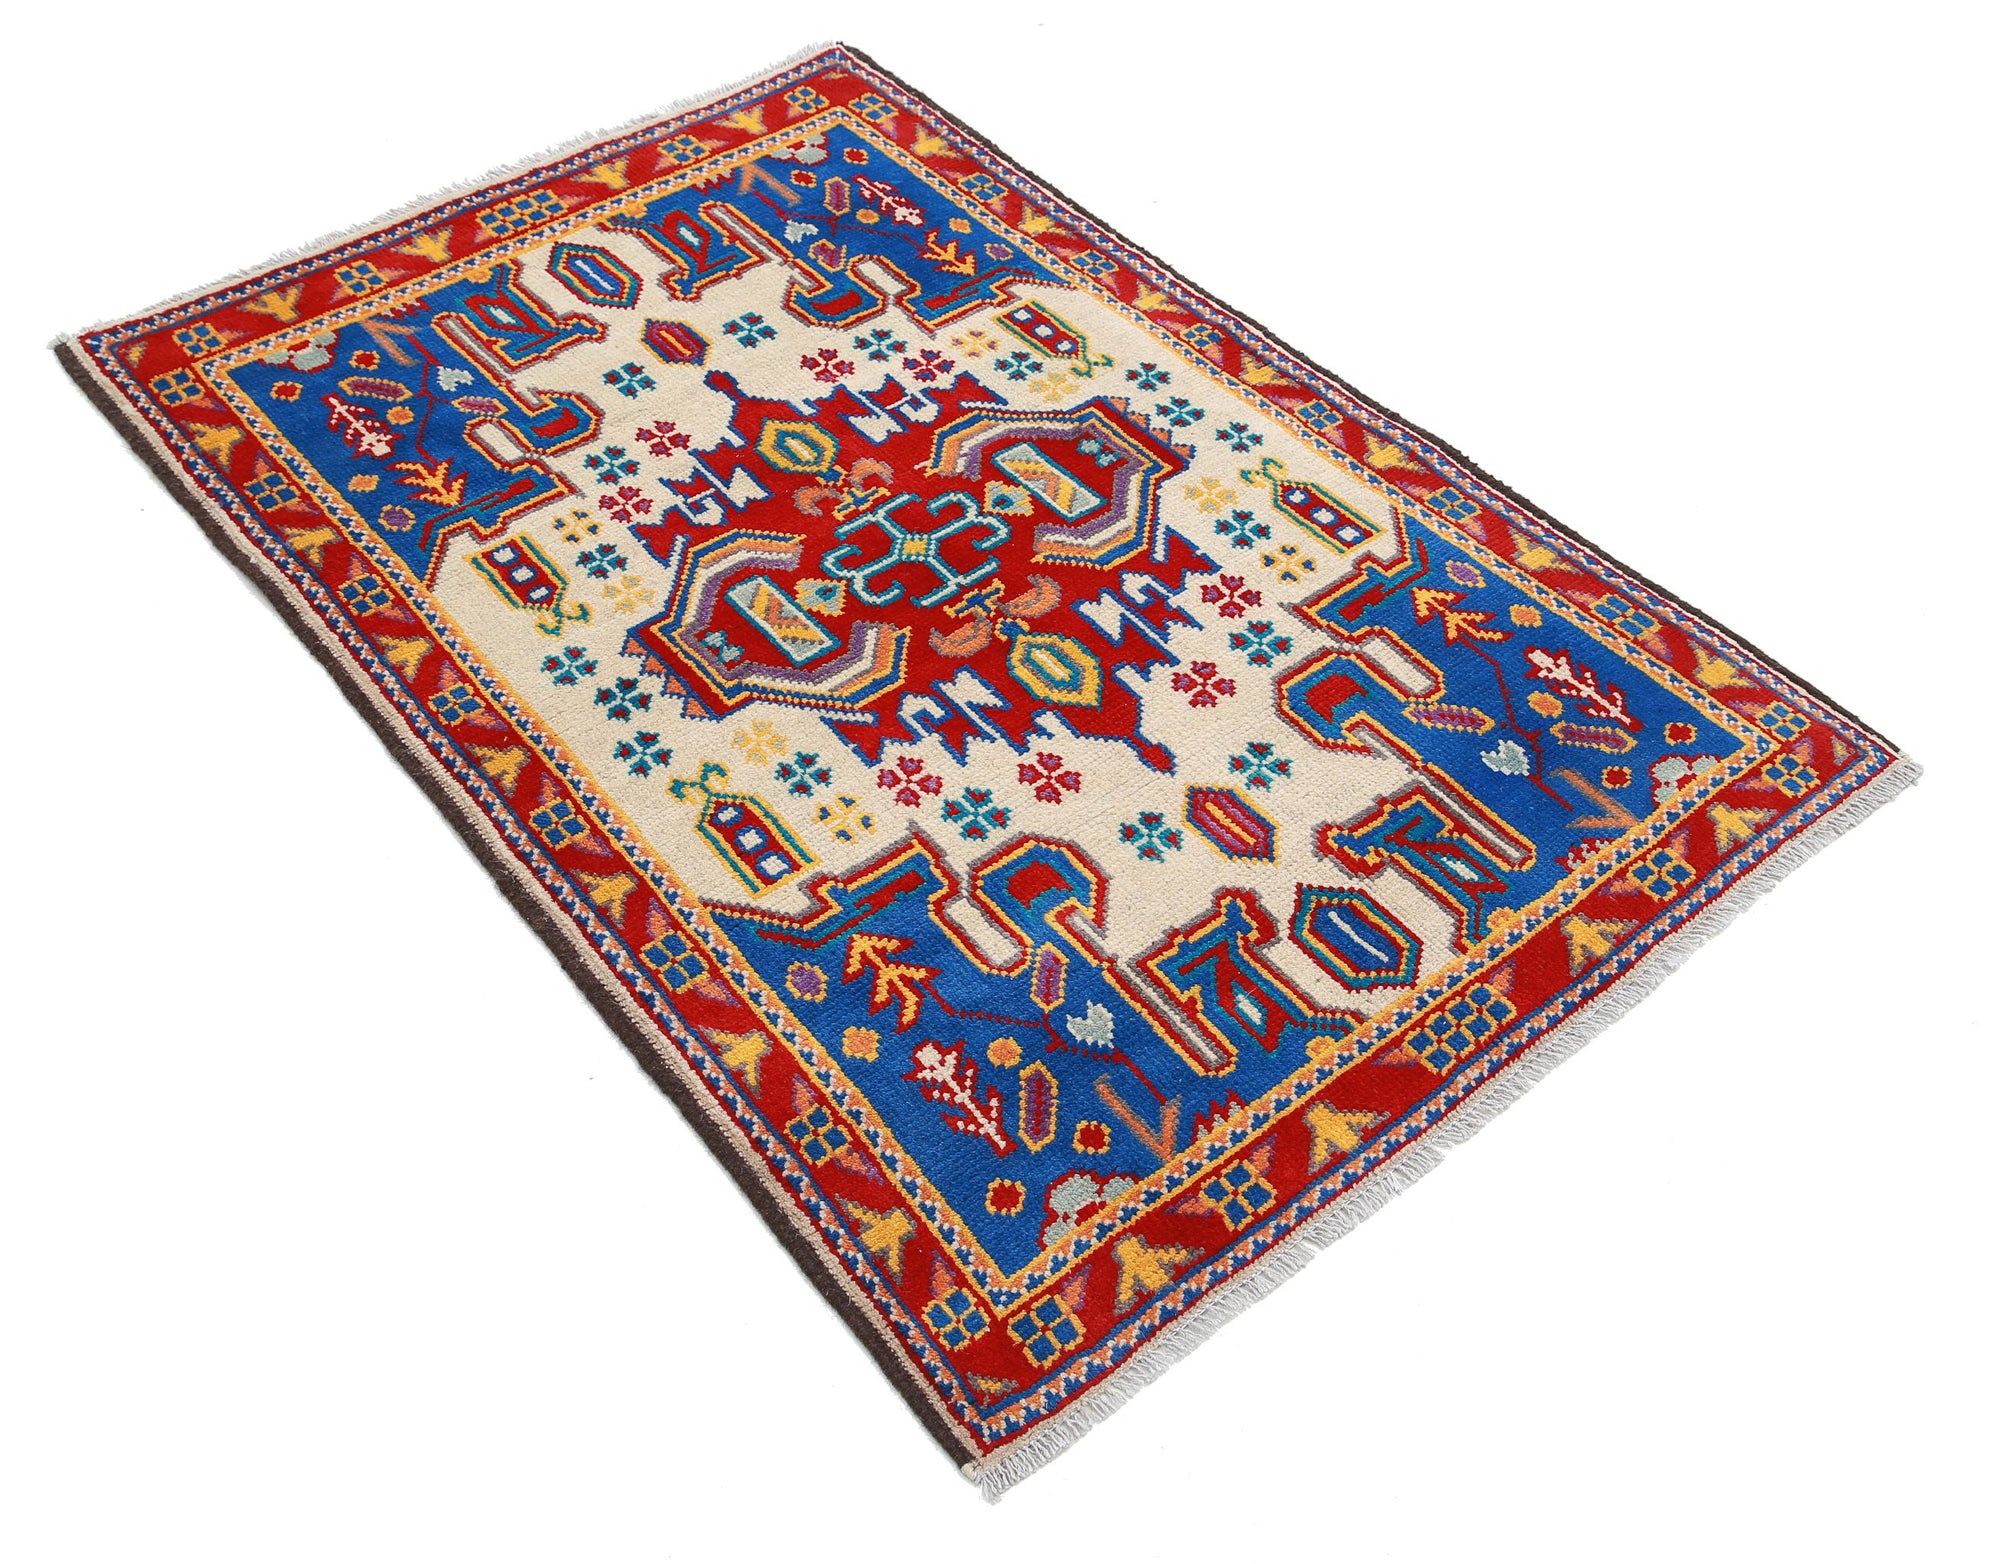 Revival-hand-knotted-qarghani-wool-rug-5014197-1.jpg